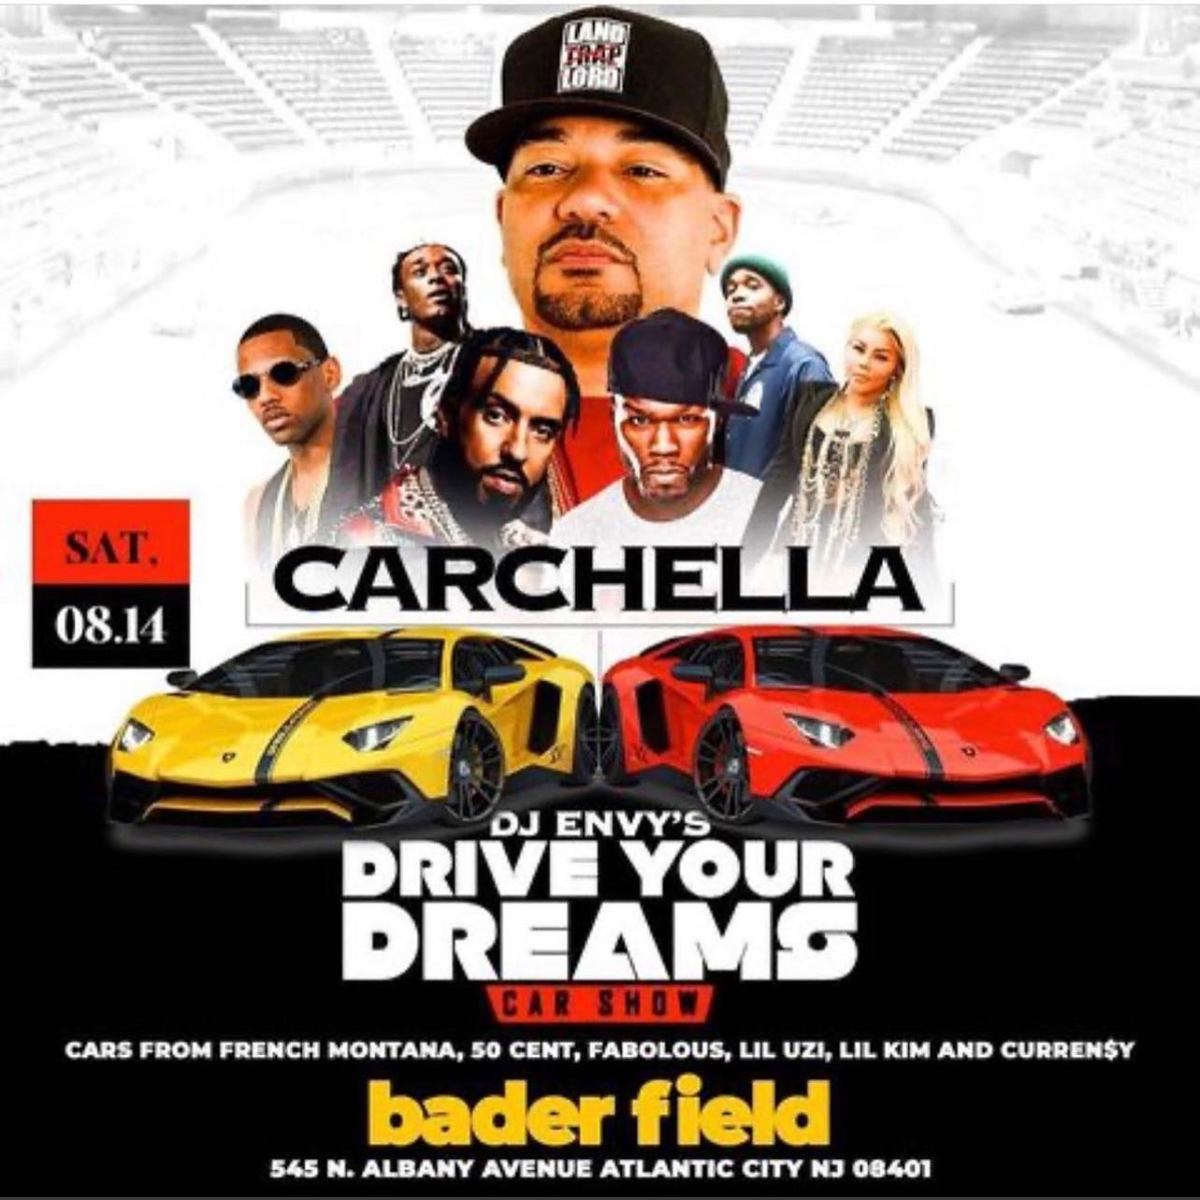 Flyer promoting the Atlantic City edition of "Carchella."